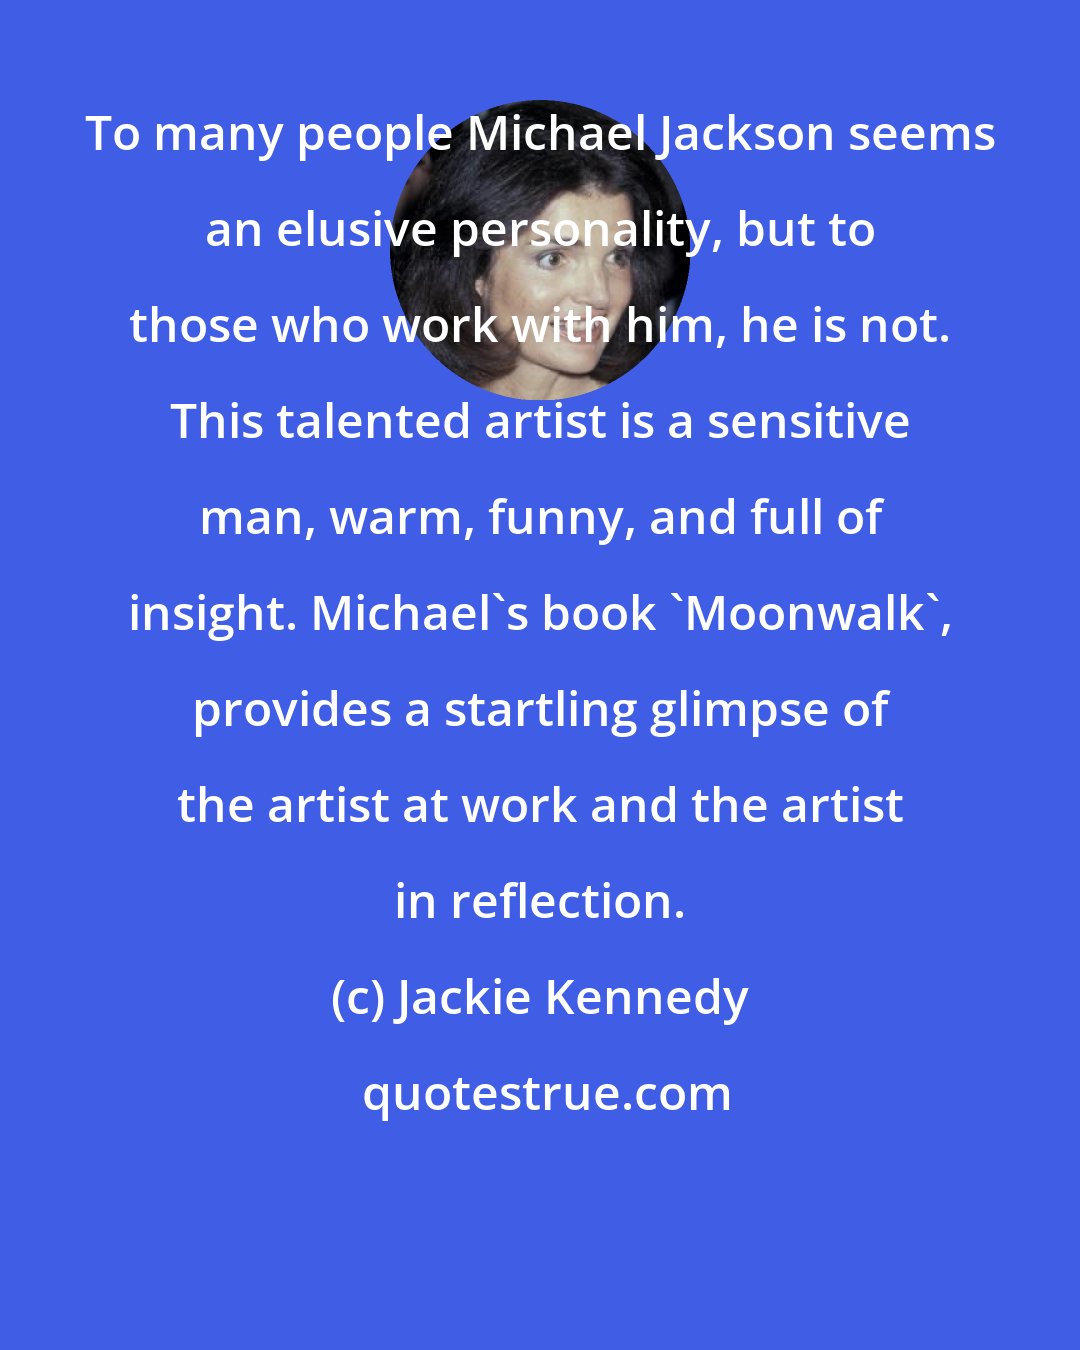 Jackie Kennedy: To many people Michael Jackson seems an elusive personality, but to those who work with him, he is not. This talented artist is a sensitive man, warm, funny, and full of insight. Michael's book 'Moonwalk', provides a startling glimpse of the artist at work and the artist in reflection.